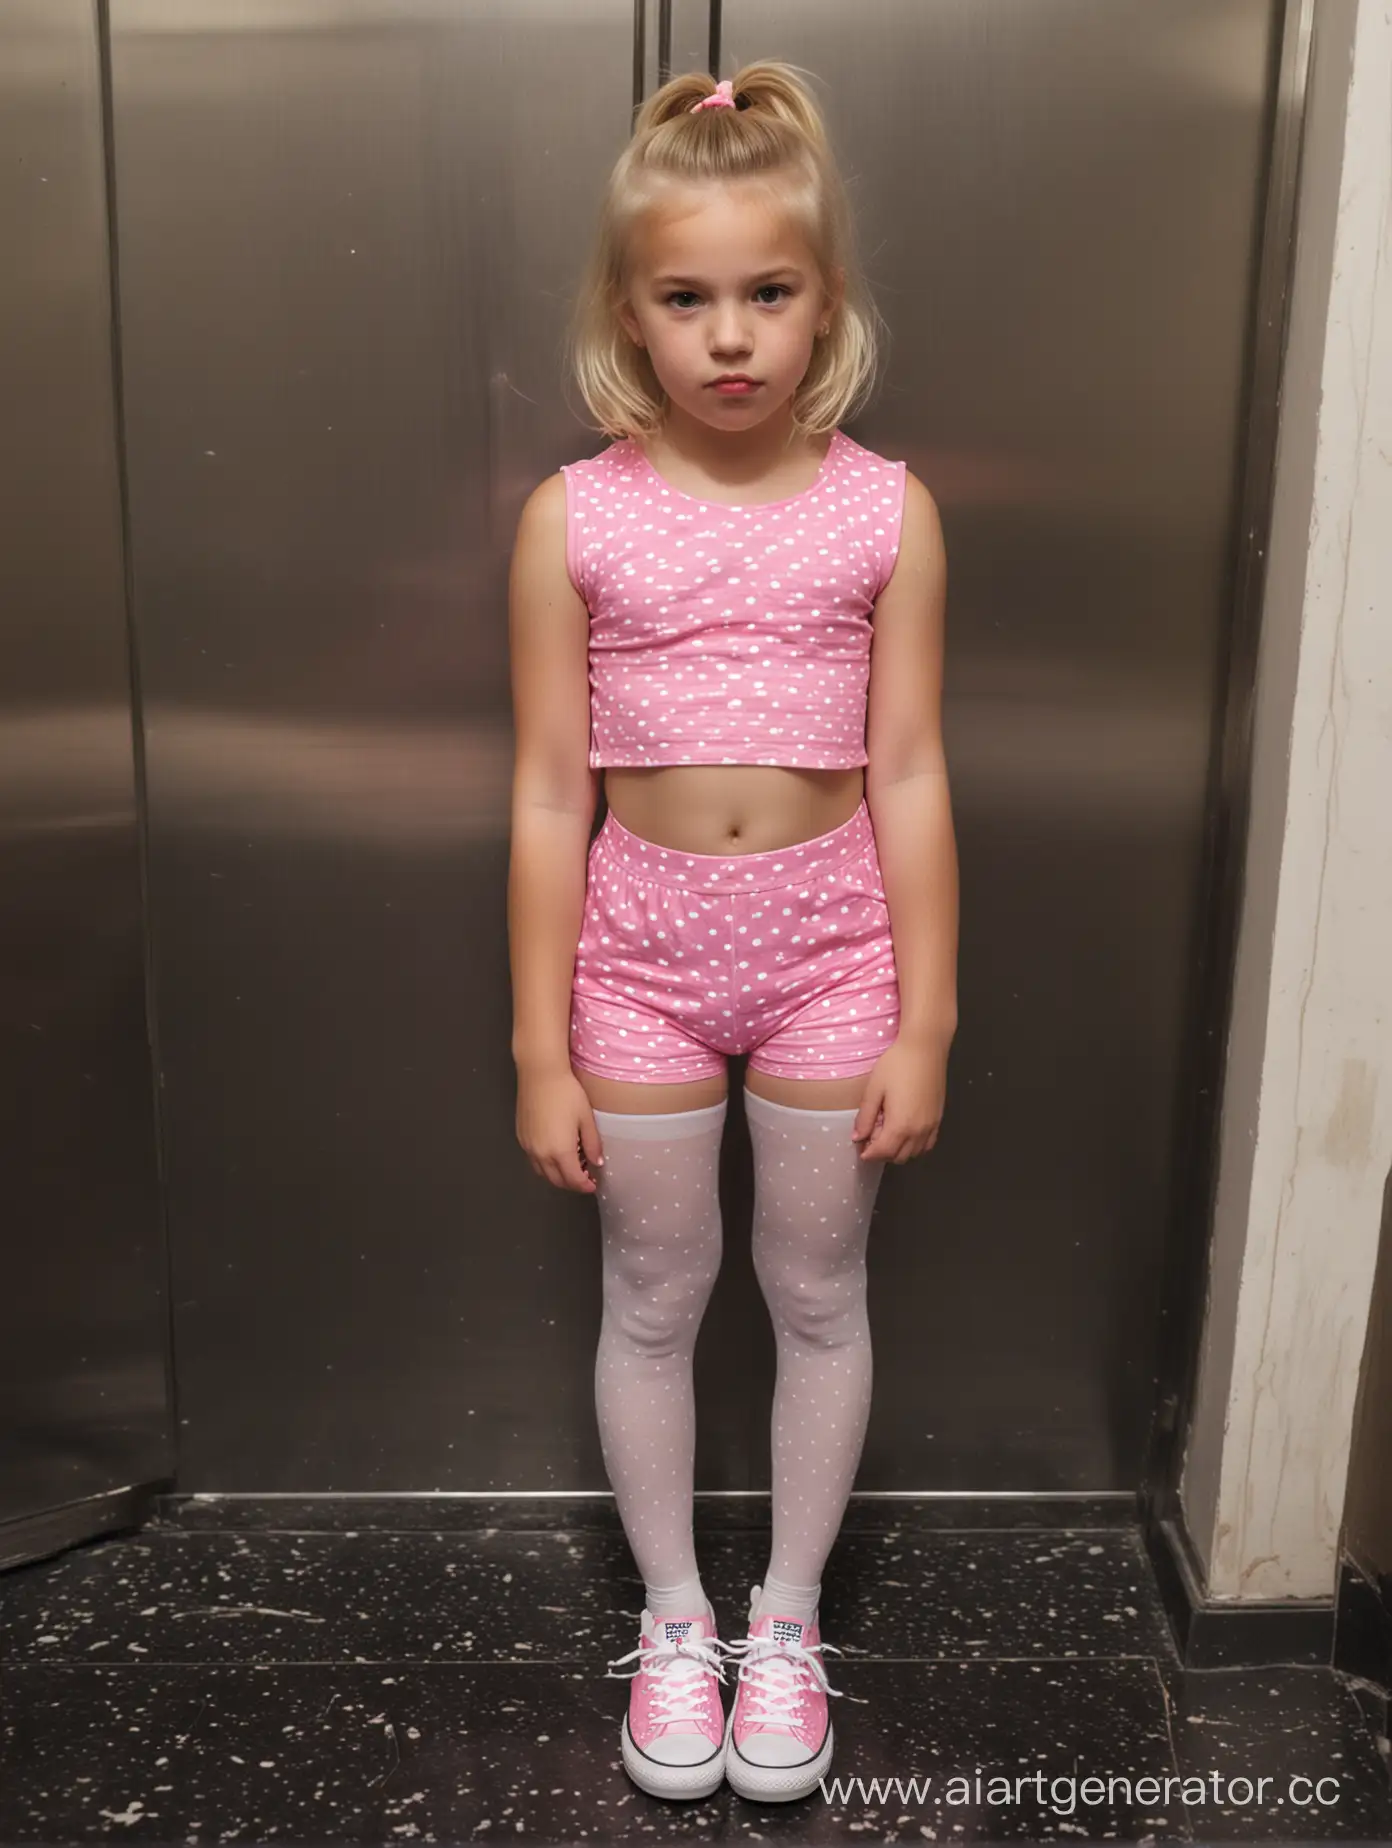 A little girl, 12 years old, kid style patterned crop top, tight shorts, pink spotted white opaque tights, converse shoes, in the elevator, very low light, sad, soft eyes, pursing lips, from above, close up, slim pink lips, focused girl, close up, blonde, kids hair, adorable, cute, pretty